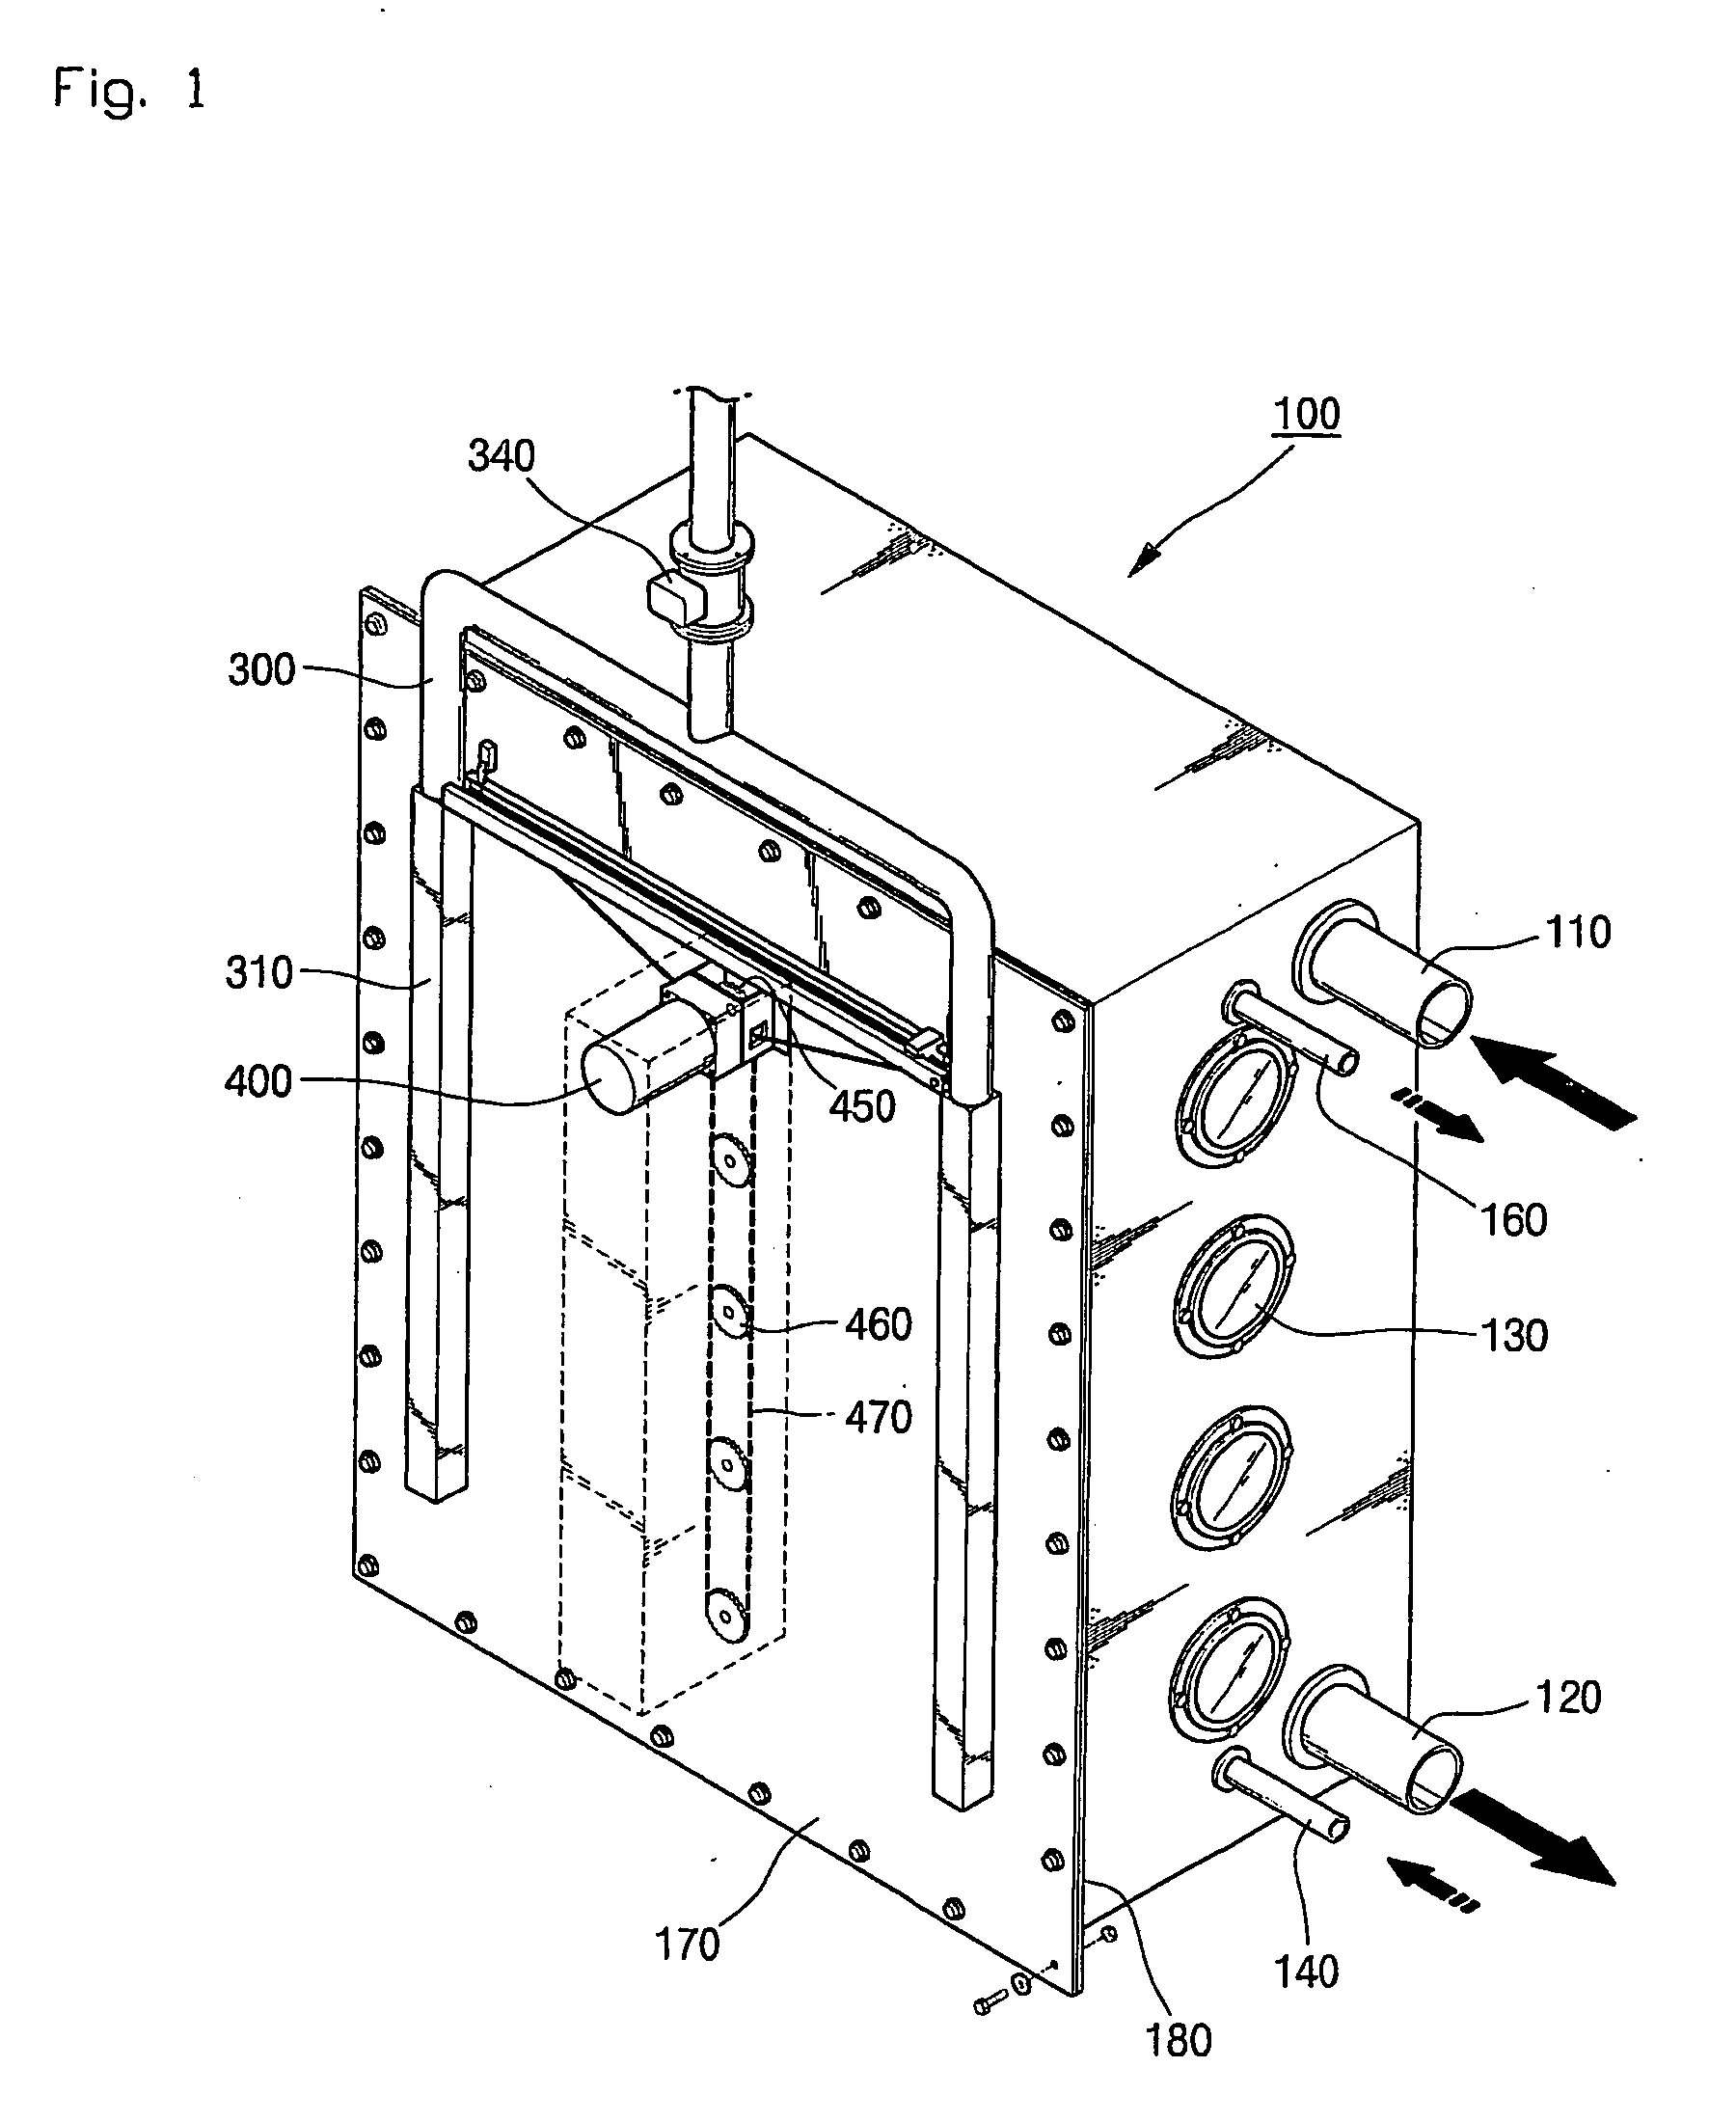 Heat exchanger for wasted heat with its cleaning apparatus